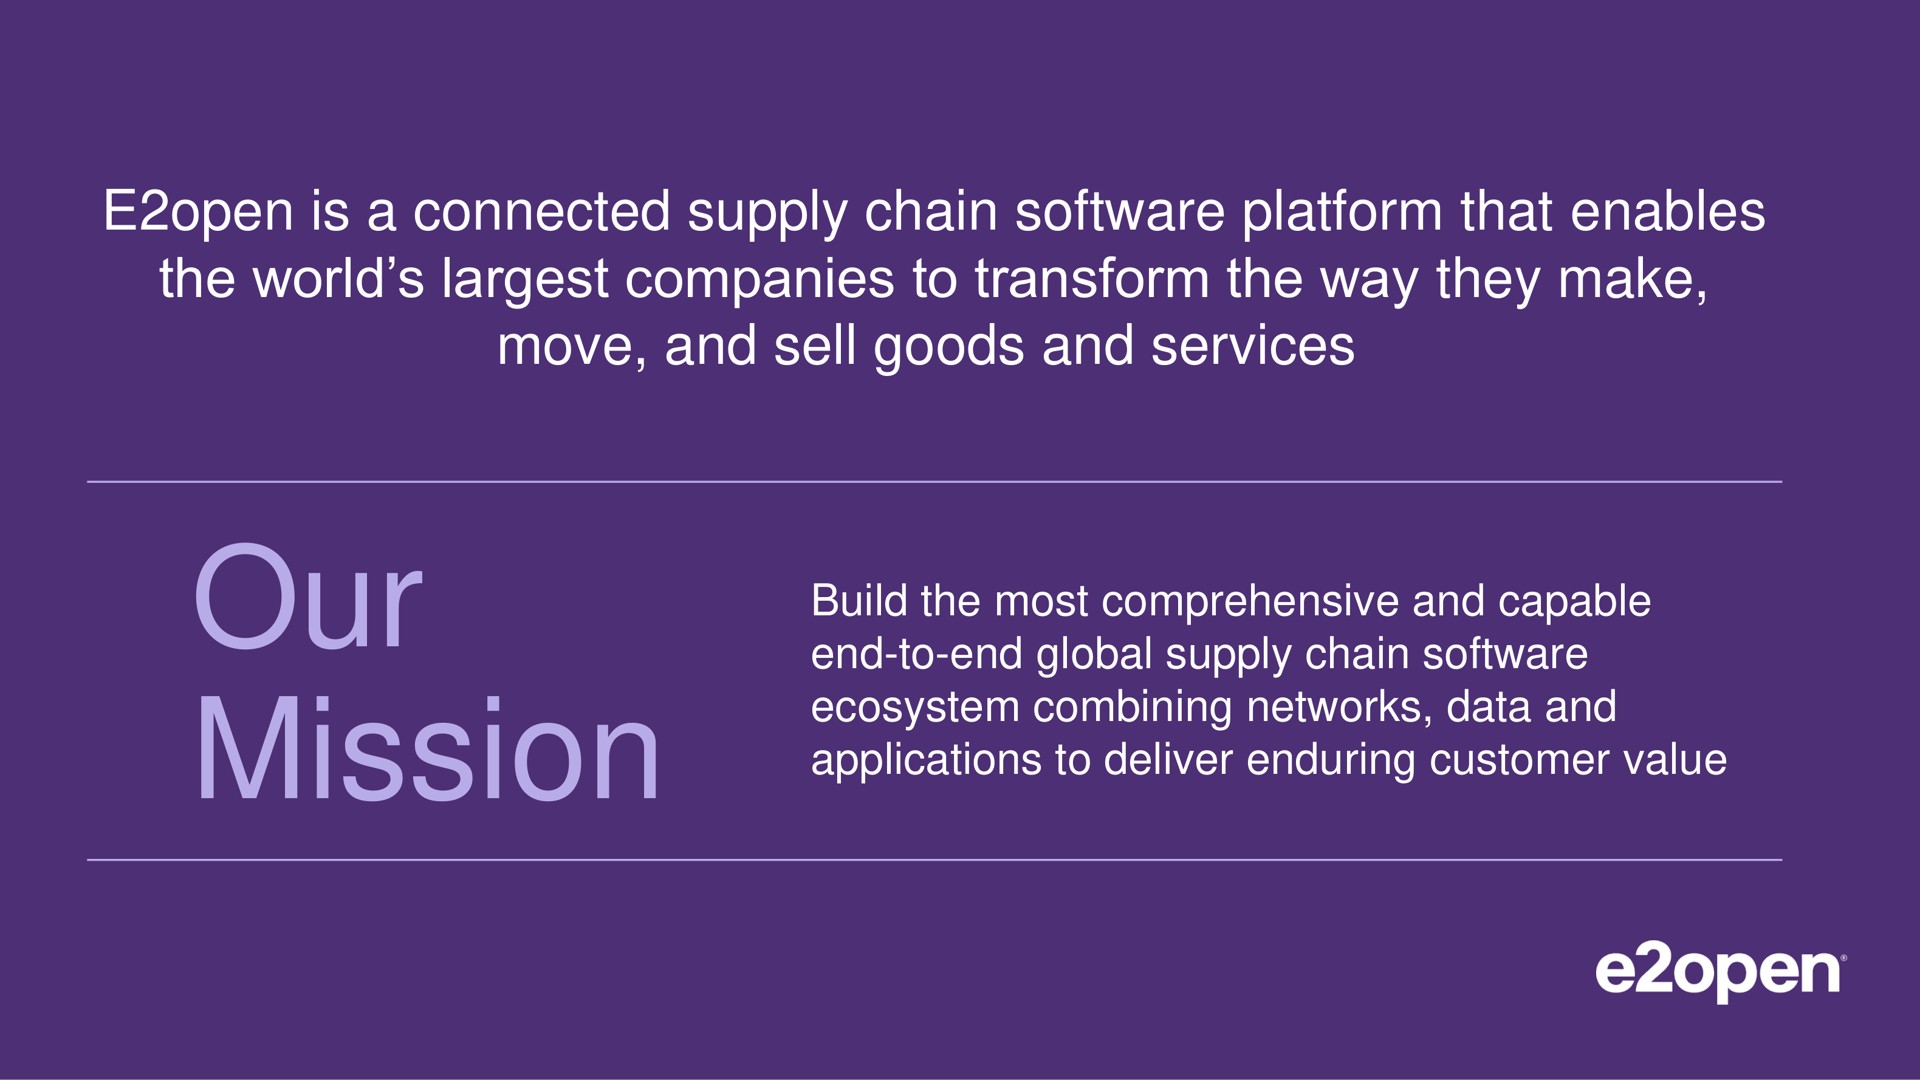 open is a connected supply chain platform that enables the world companies to transform the way they make move and sell goods and services our mission | E2open